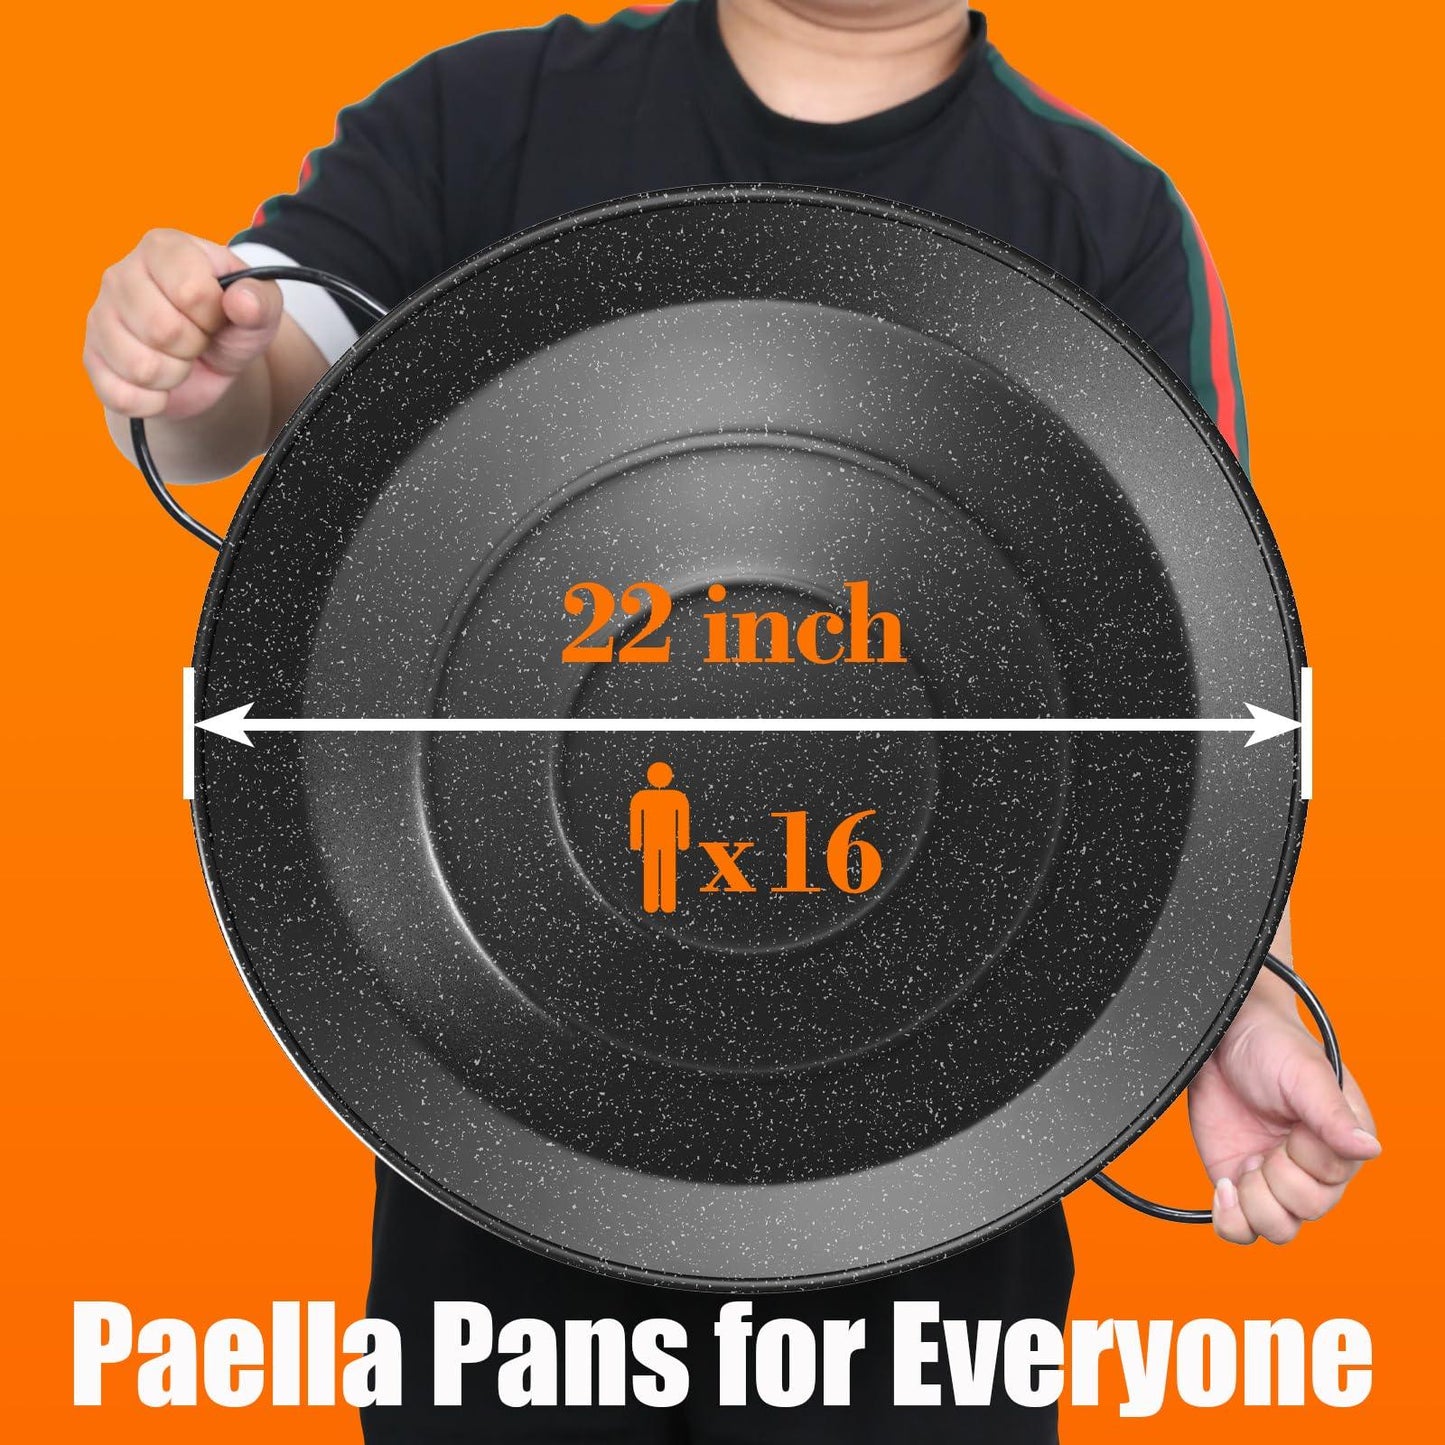 GRILL FORCE 22 Inch Paella Burner and Stand Set,Paella Pan Set,22 Inch Paella Pan,Paella Burner,Paella Pan and Burner Set,Paellera,Paella Kit with Carry Bag,Built-In Ignitor Regulator Hose,16 Servings - CookCave